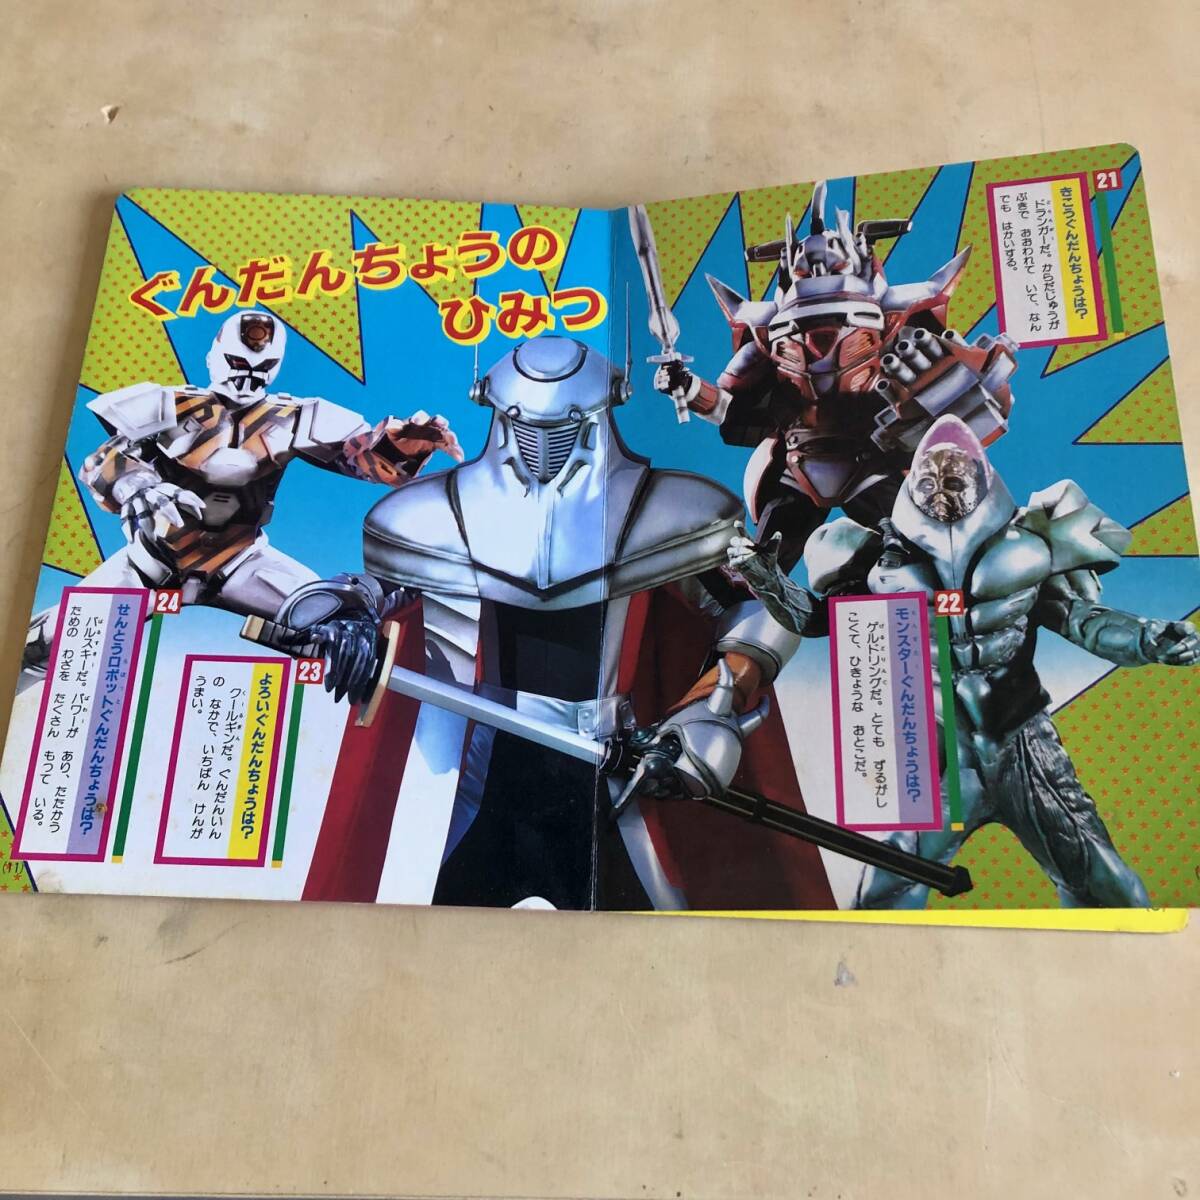  that time thing *.. company tv picture book Chojinki Metalder 